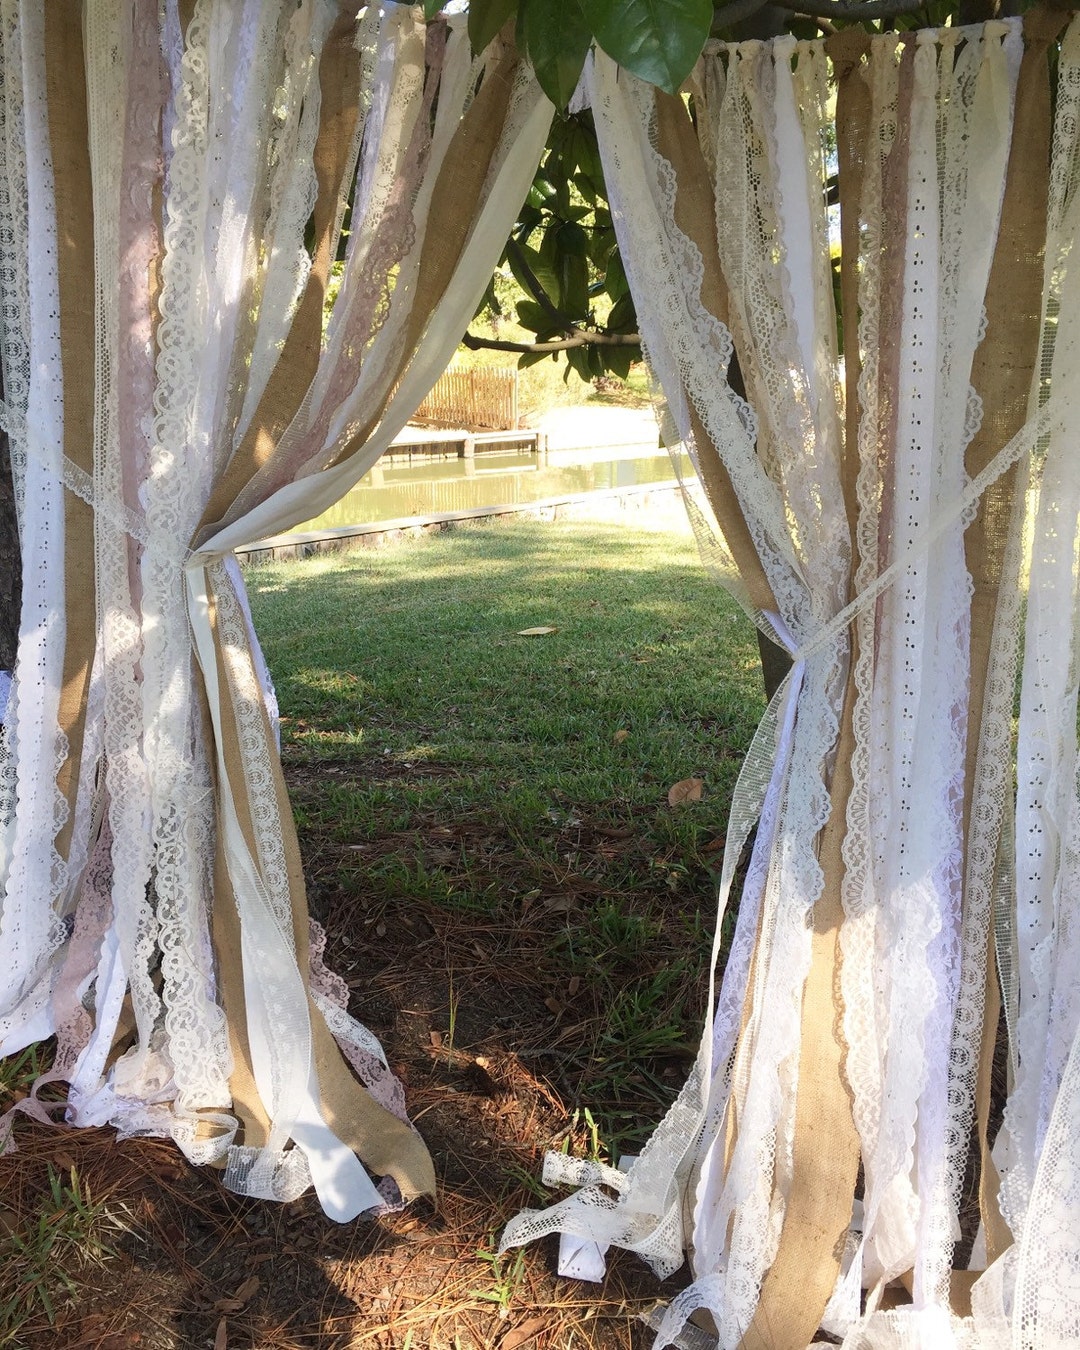 Lace Ribbon : , Burlap for Wedding and Special Events